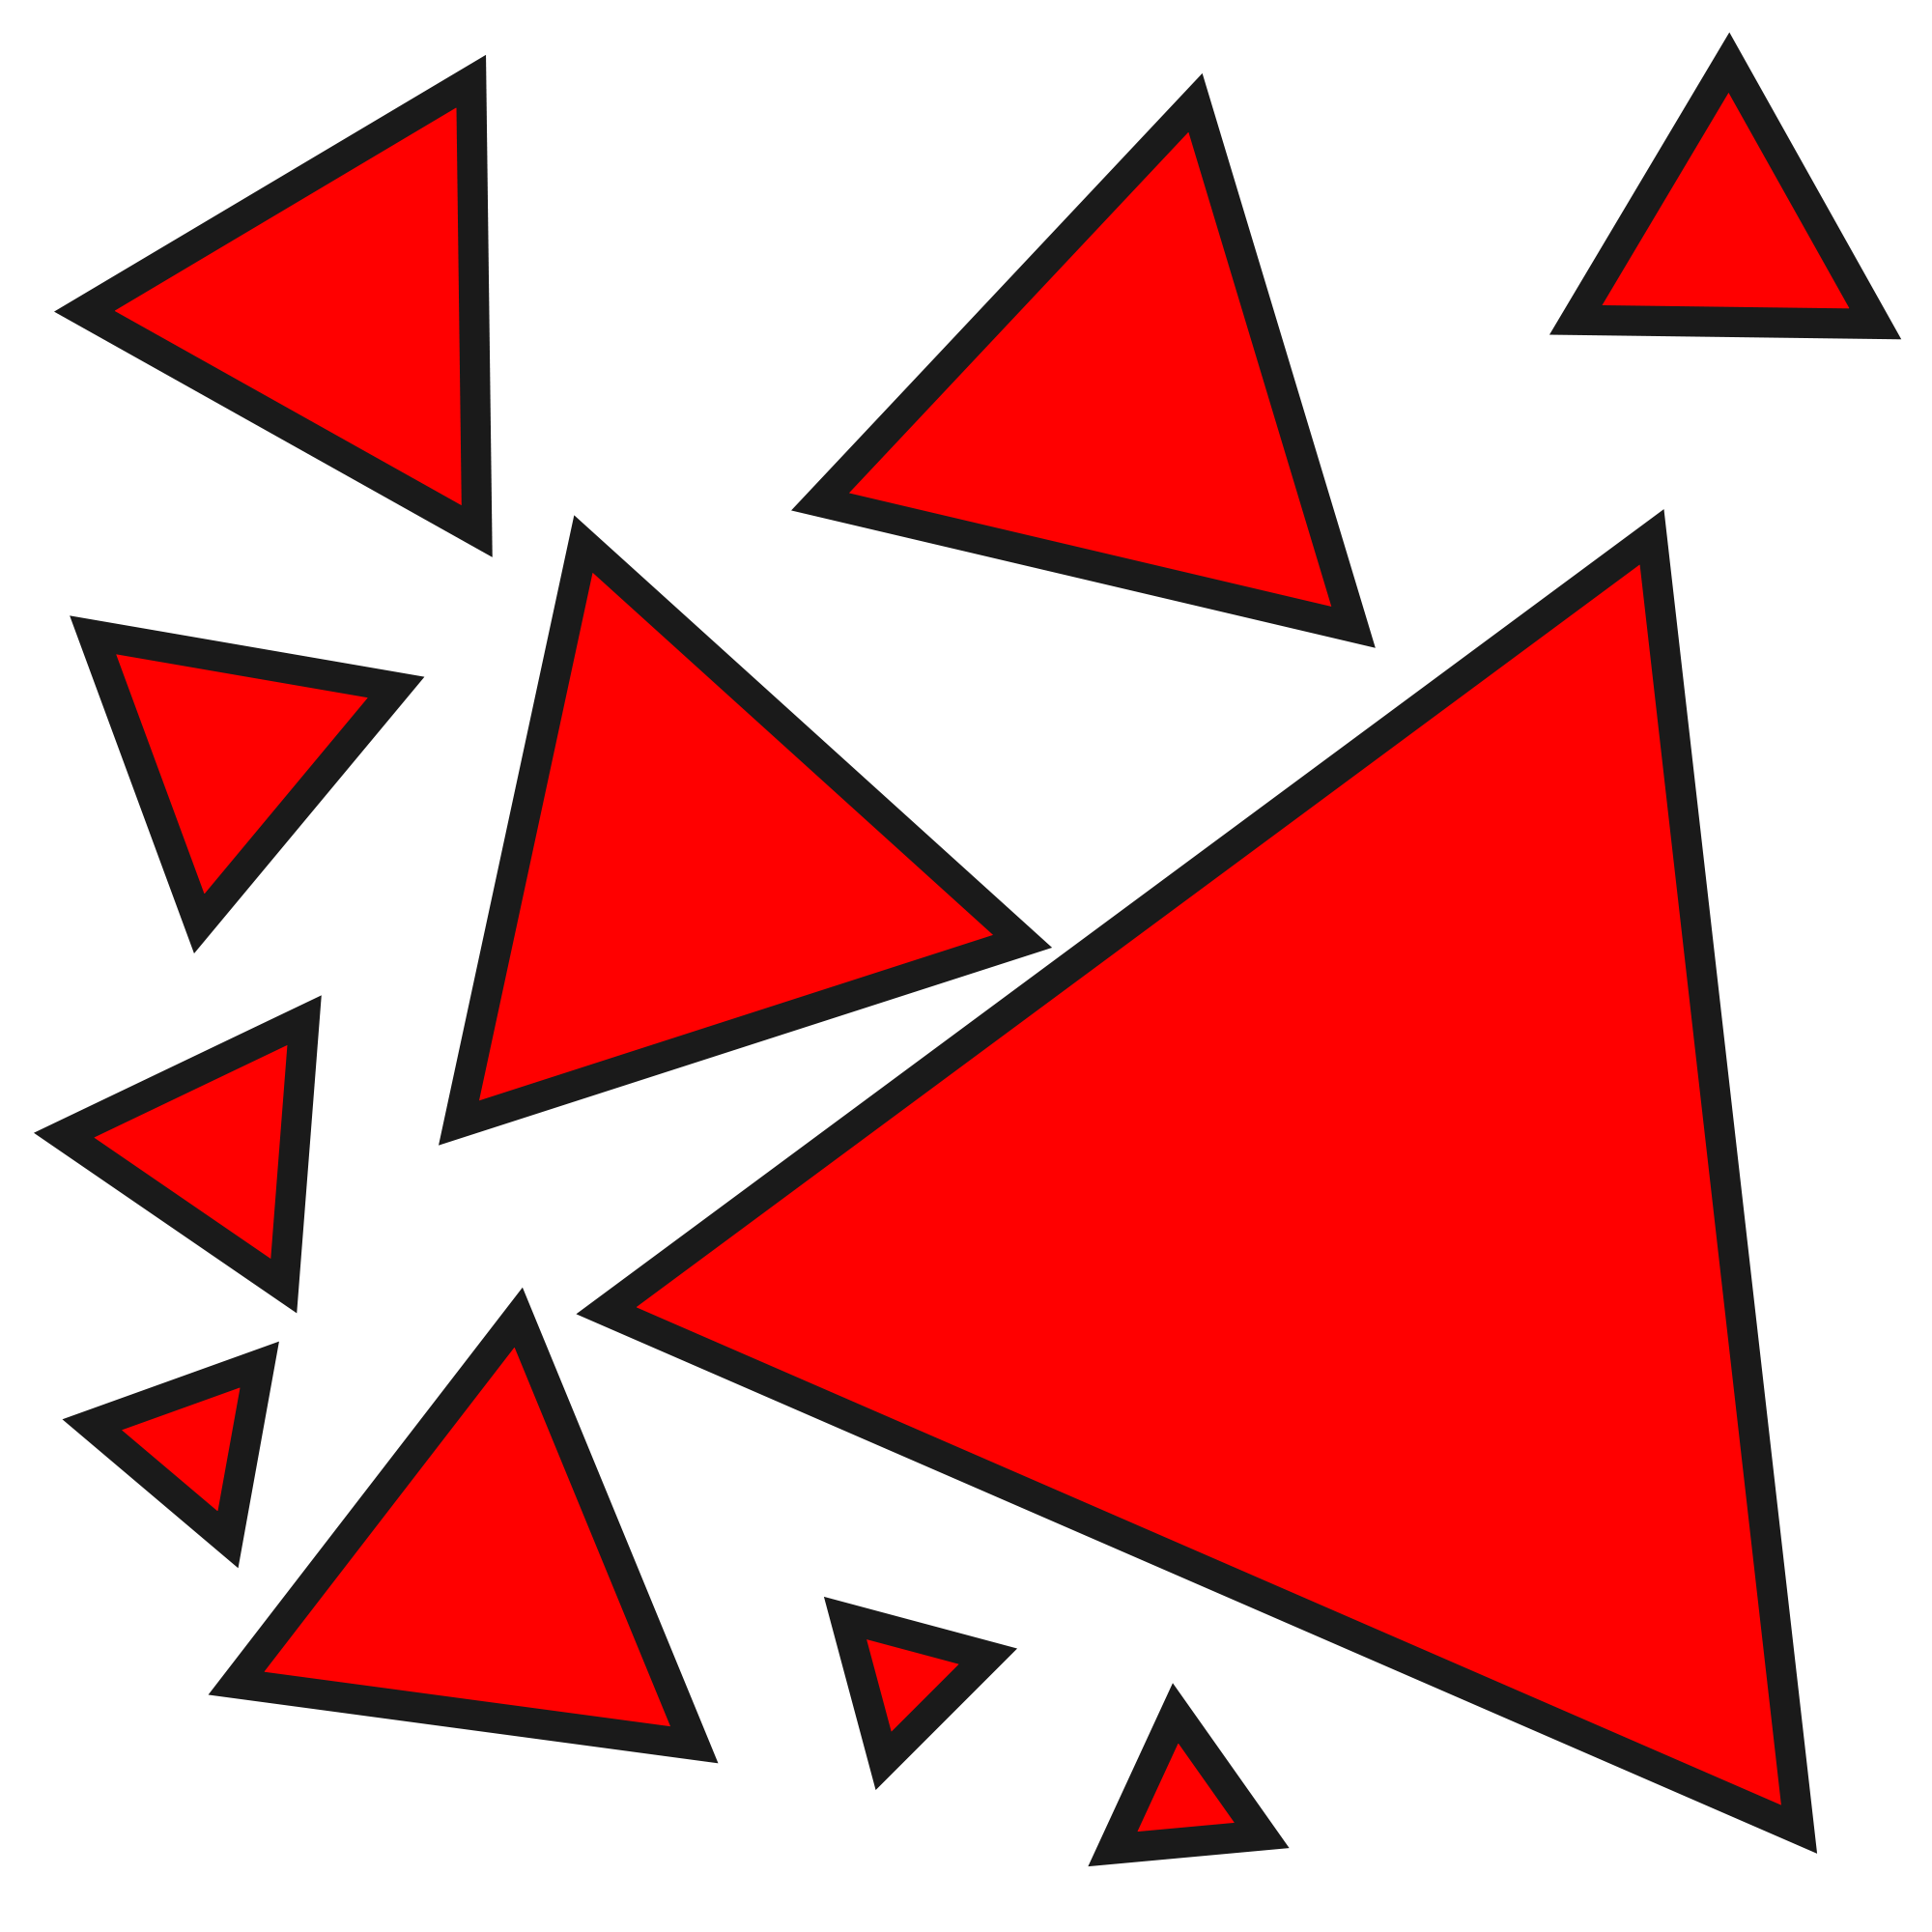 6 of Red Triangles Logo - File:Red Triangles.svg - Wikimedia Commons